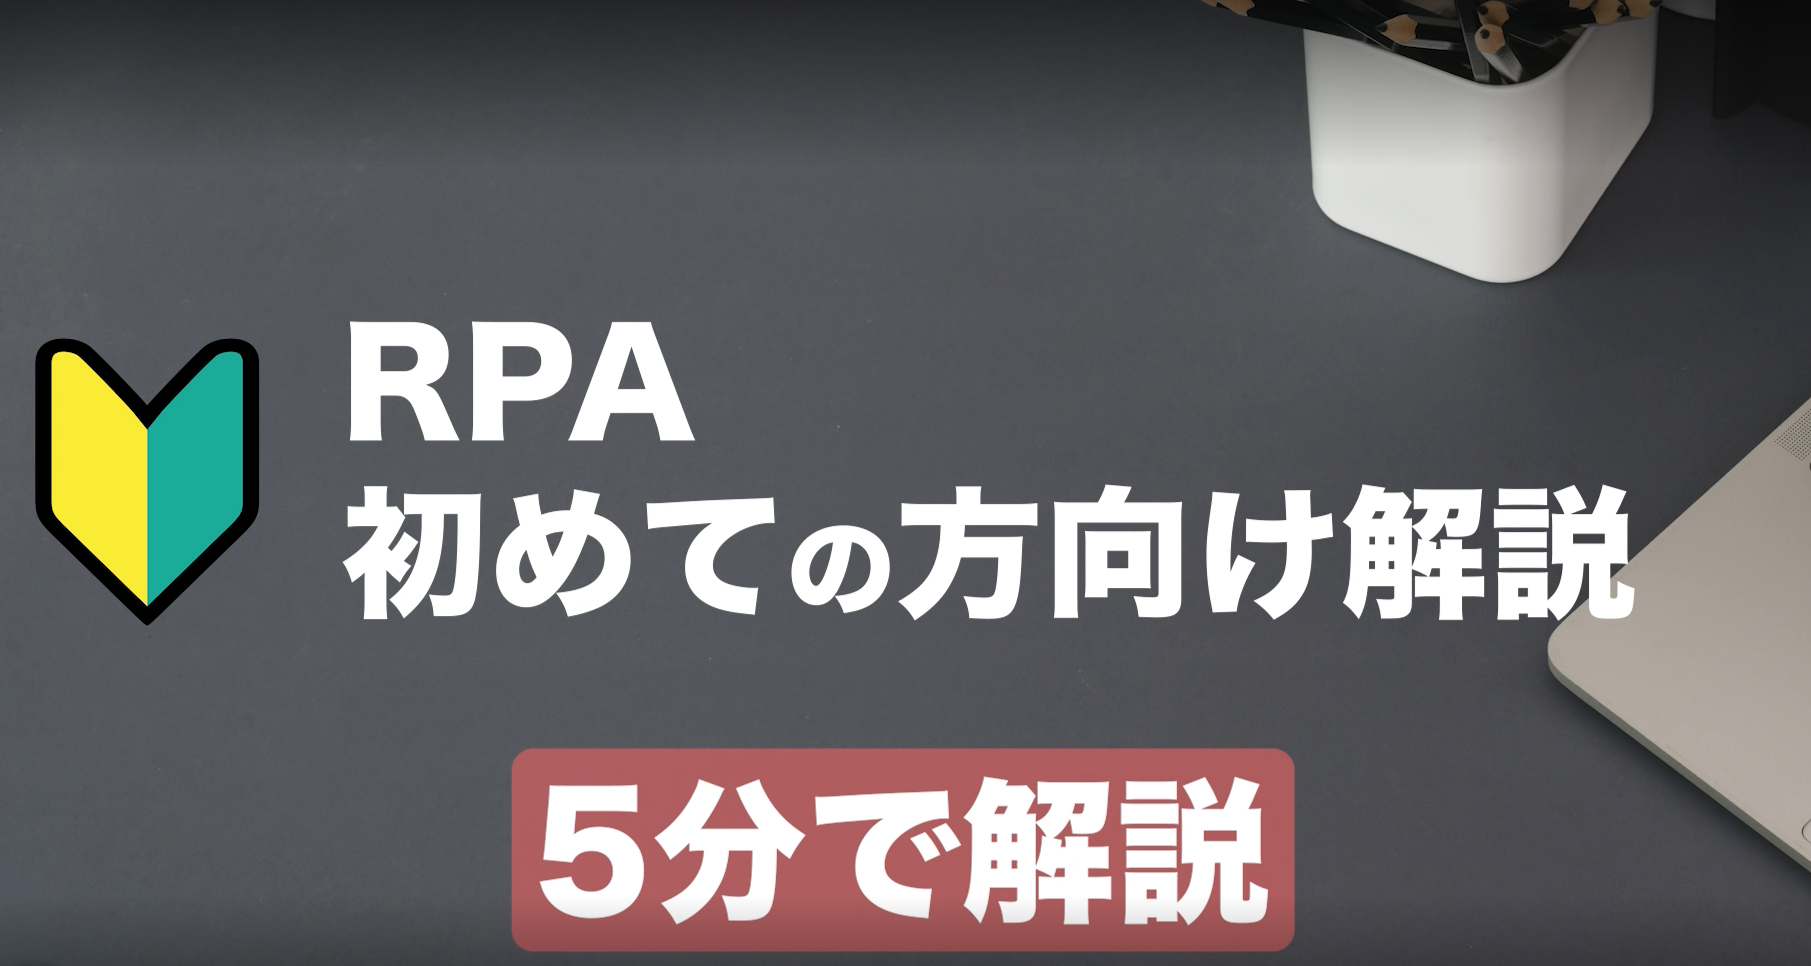 RPA初めての方向け5分解説